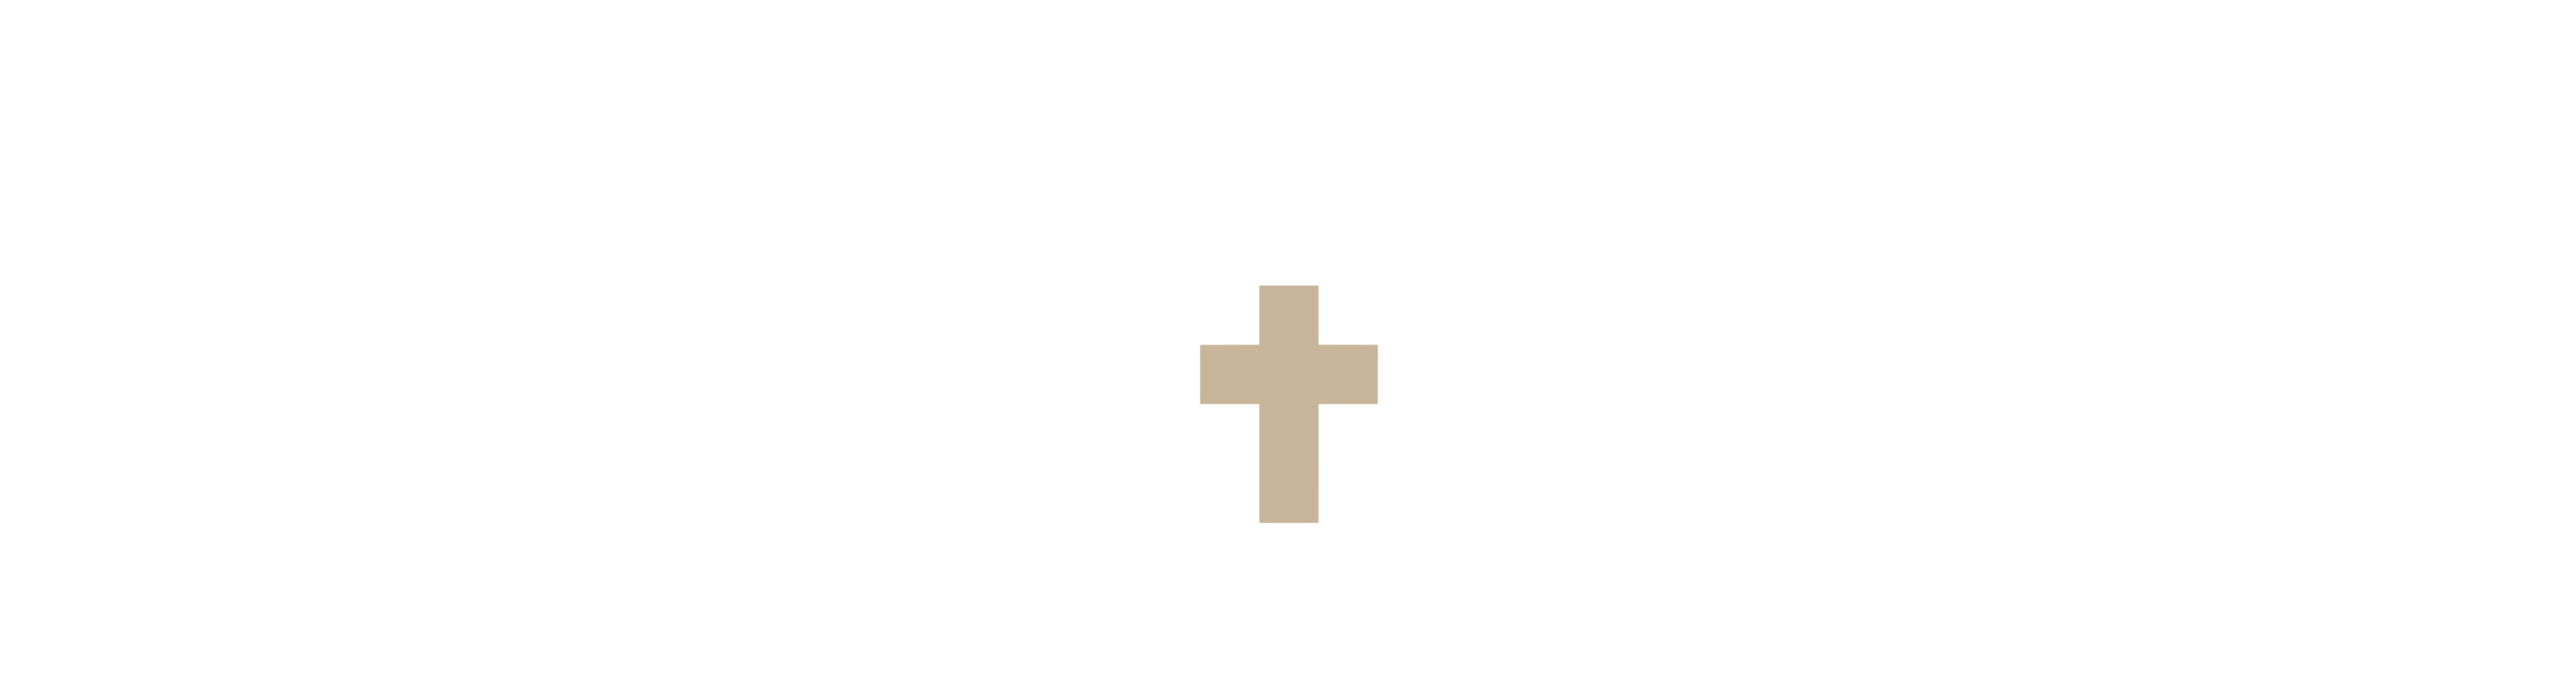 Wunderlich Counseling & Consulting